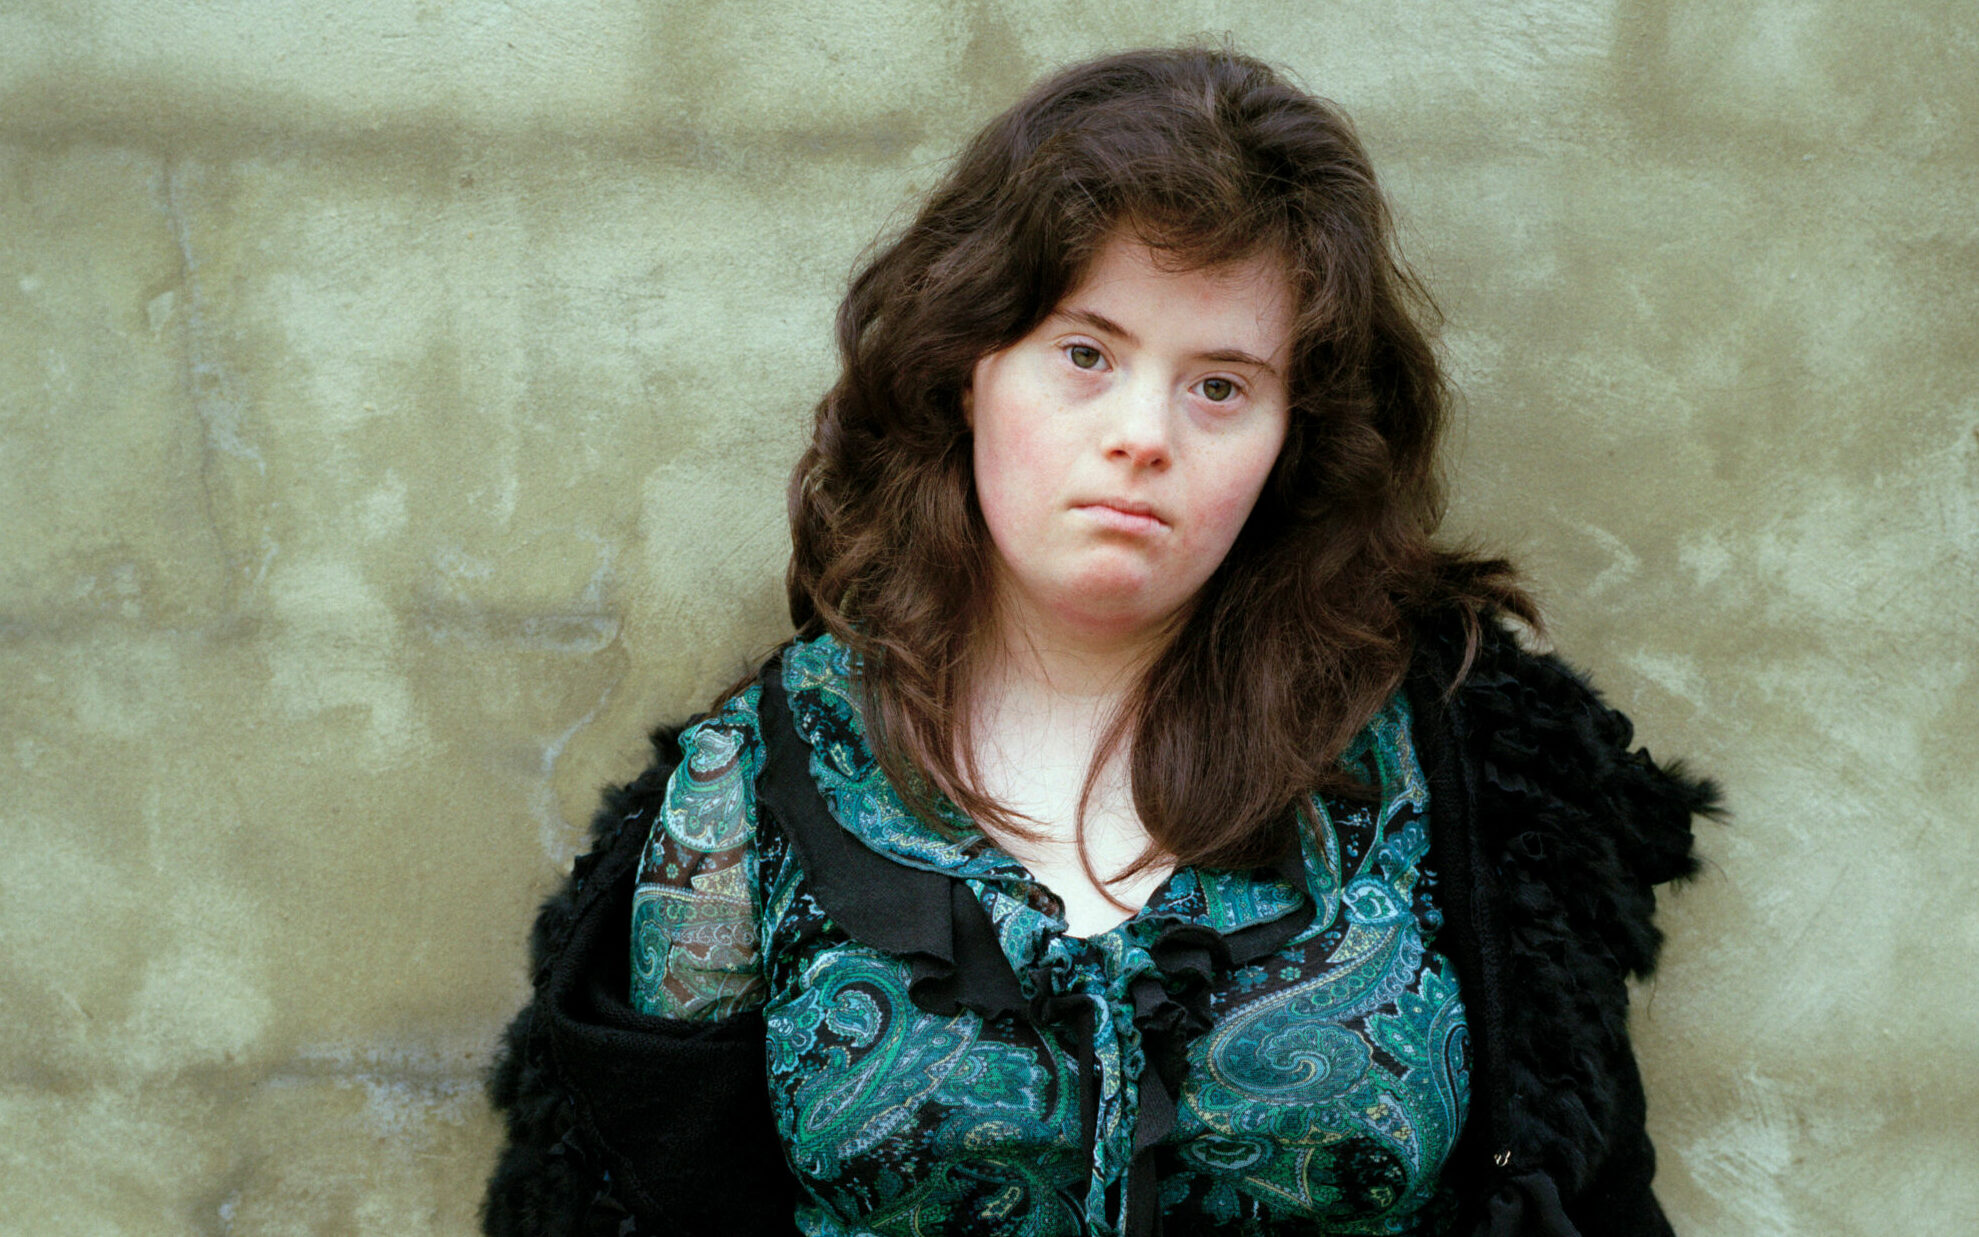 A young white woman with Down's Syndrome is stood against a plain stone wall staring directly at the camera. She has long dark hair and is wearing a patterned green and black blouse.